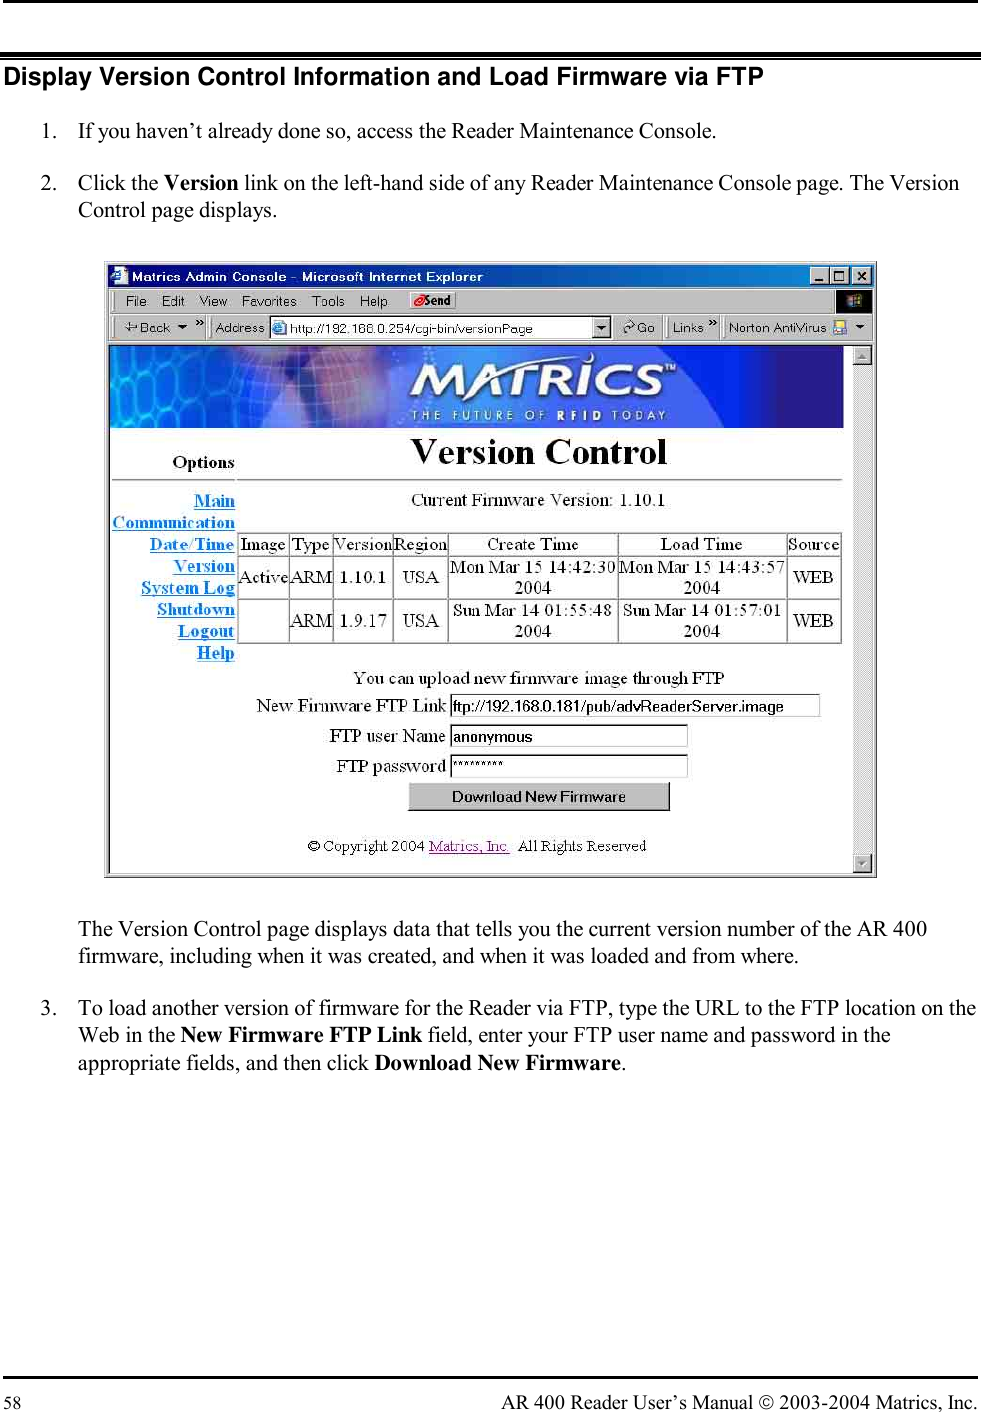  58  AR 400 Reader User’s Manual  2003-2004 Matrics, Inc. Display Version Control Information and Load Firmware via FTP 1.  If you haven’t already done so, access the Reader Maintenance Console. 2. Click the Version link on the left-hand side of any Reader Maintenance Console page. The Version Control page displays.  The Version Control page displays data that tells you the current version number of the AR 400 firmware, including when it was created, and when it was loaded and from where. 3.  To load another version of firmware for the Reader via FTP, type the URL to the FTP location on the Web in the New Firmware FTP Link field, enter your FTP user name and password in the appropriate fields, and then click Download New Firmware.  